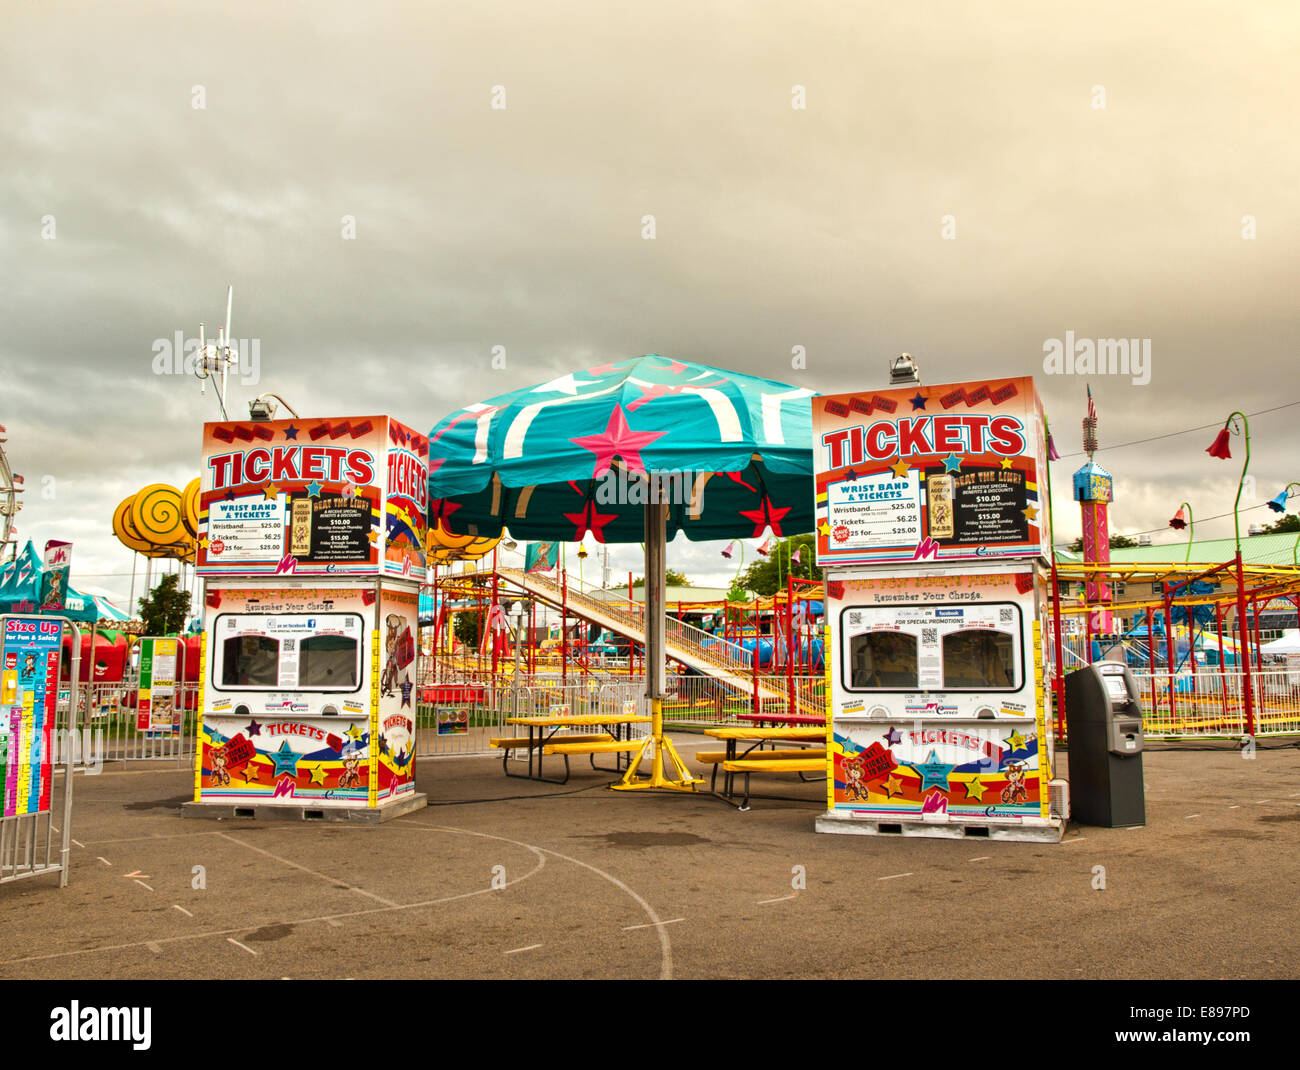 midway at a fair Stock Photo